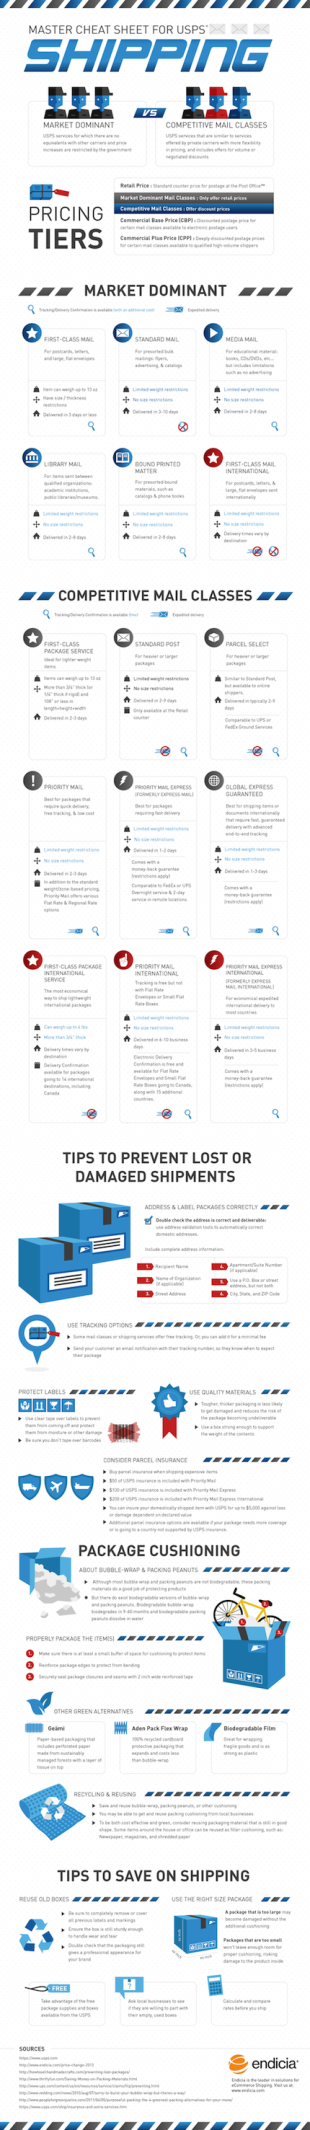 Master Cheat Sheet for USPS Shipping image master cheat sheet for usps shipping infographic s